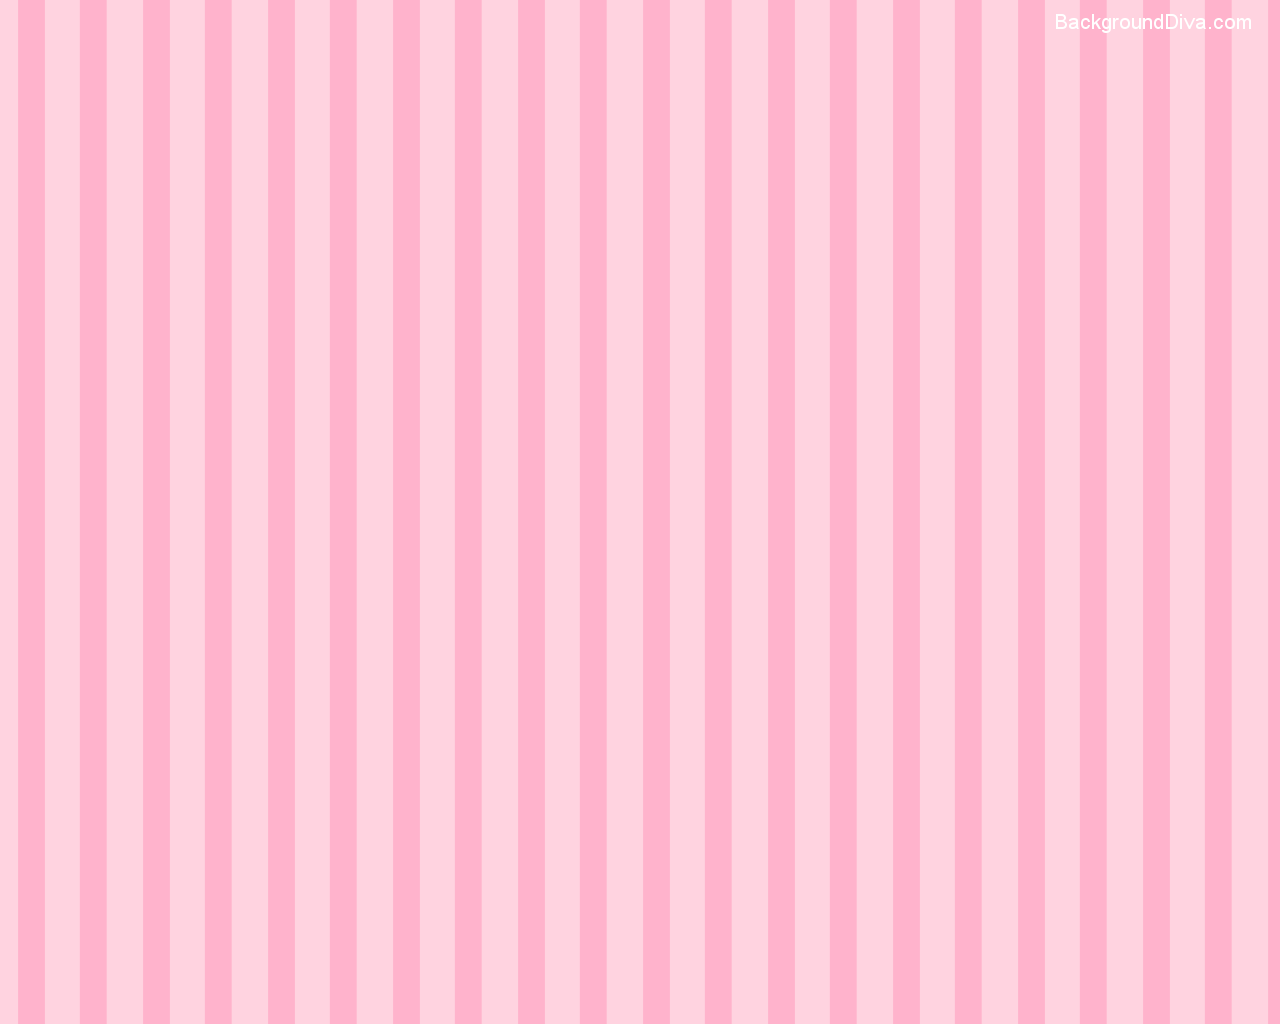 Light Pink Striped Wallpaper Images Pictures   Becuo 1280x1024